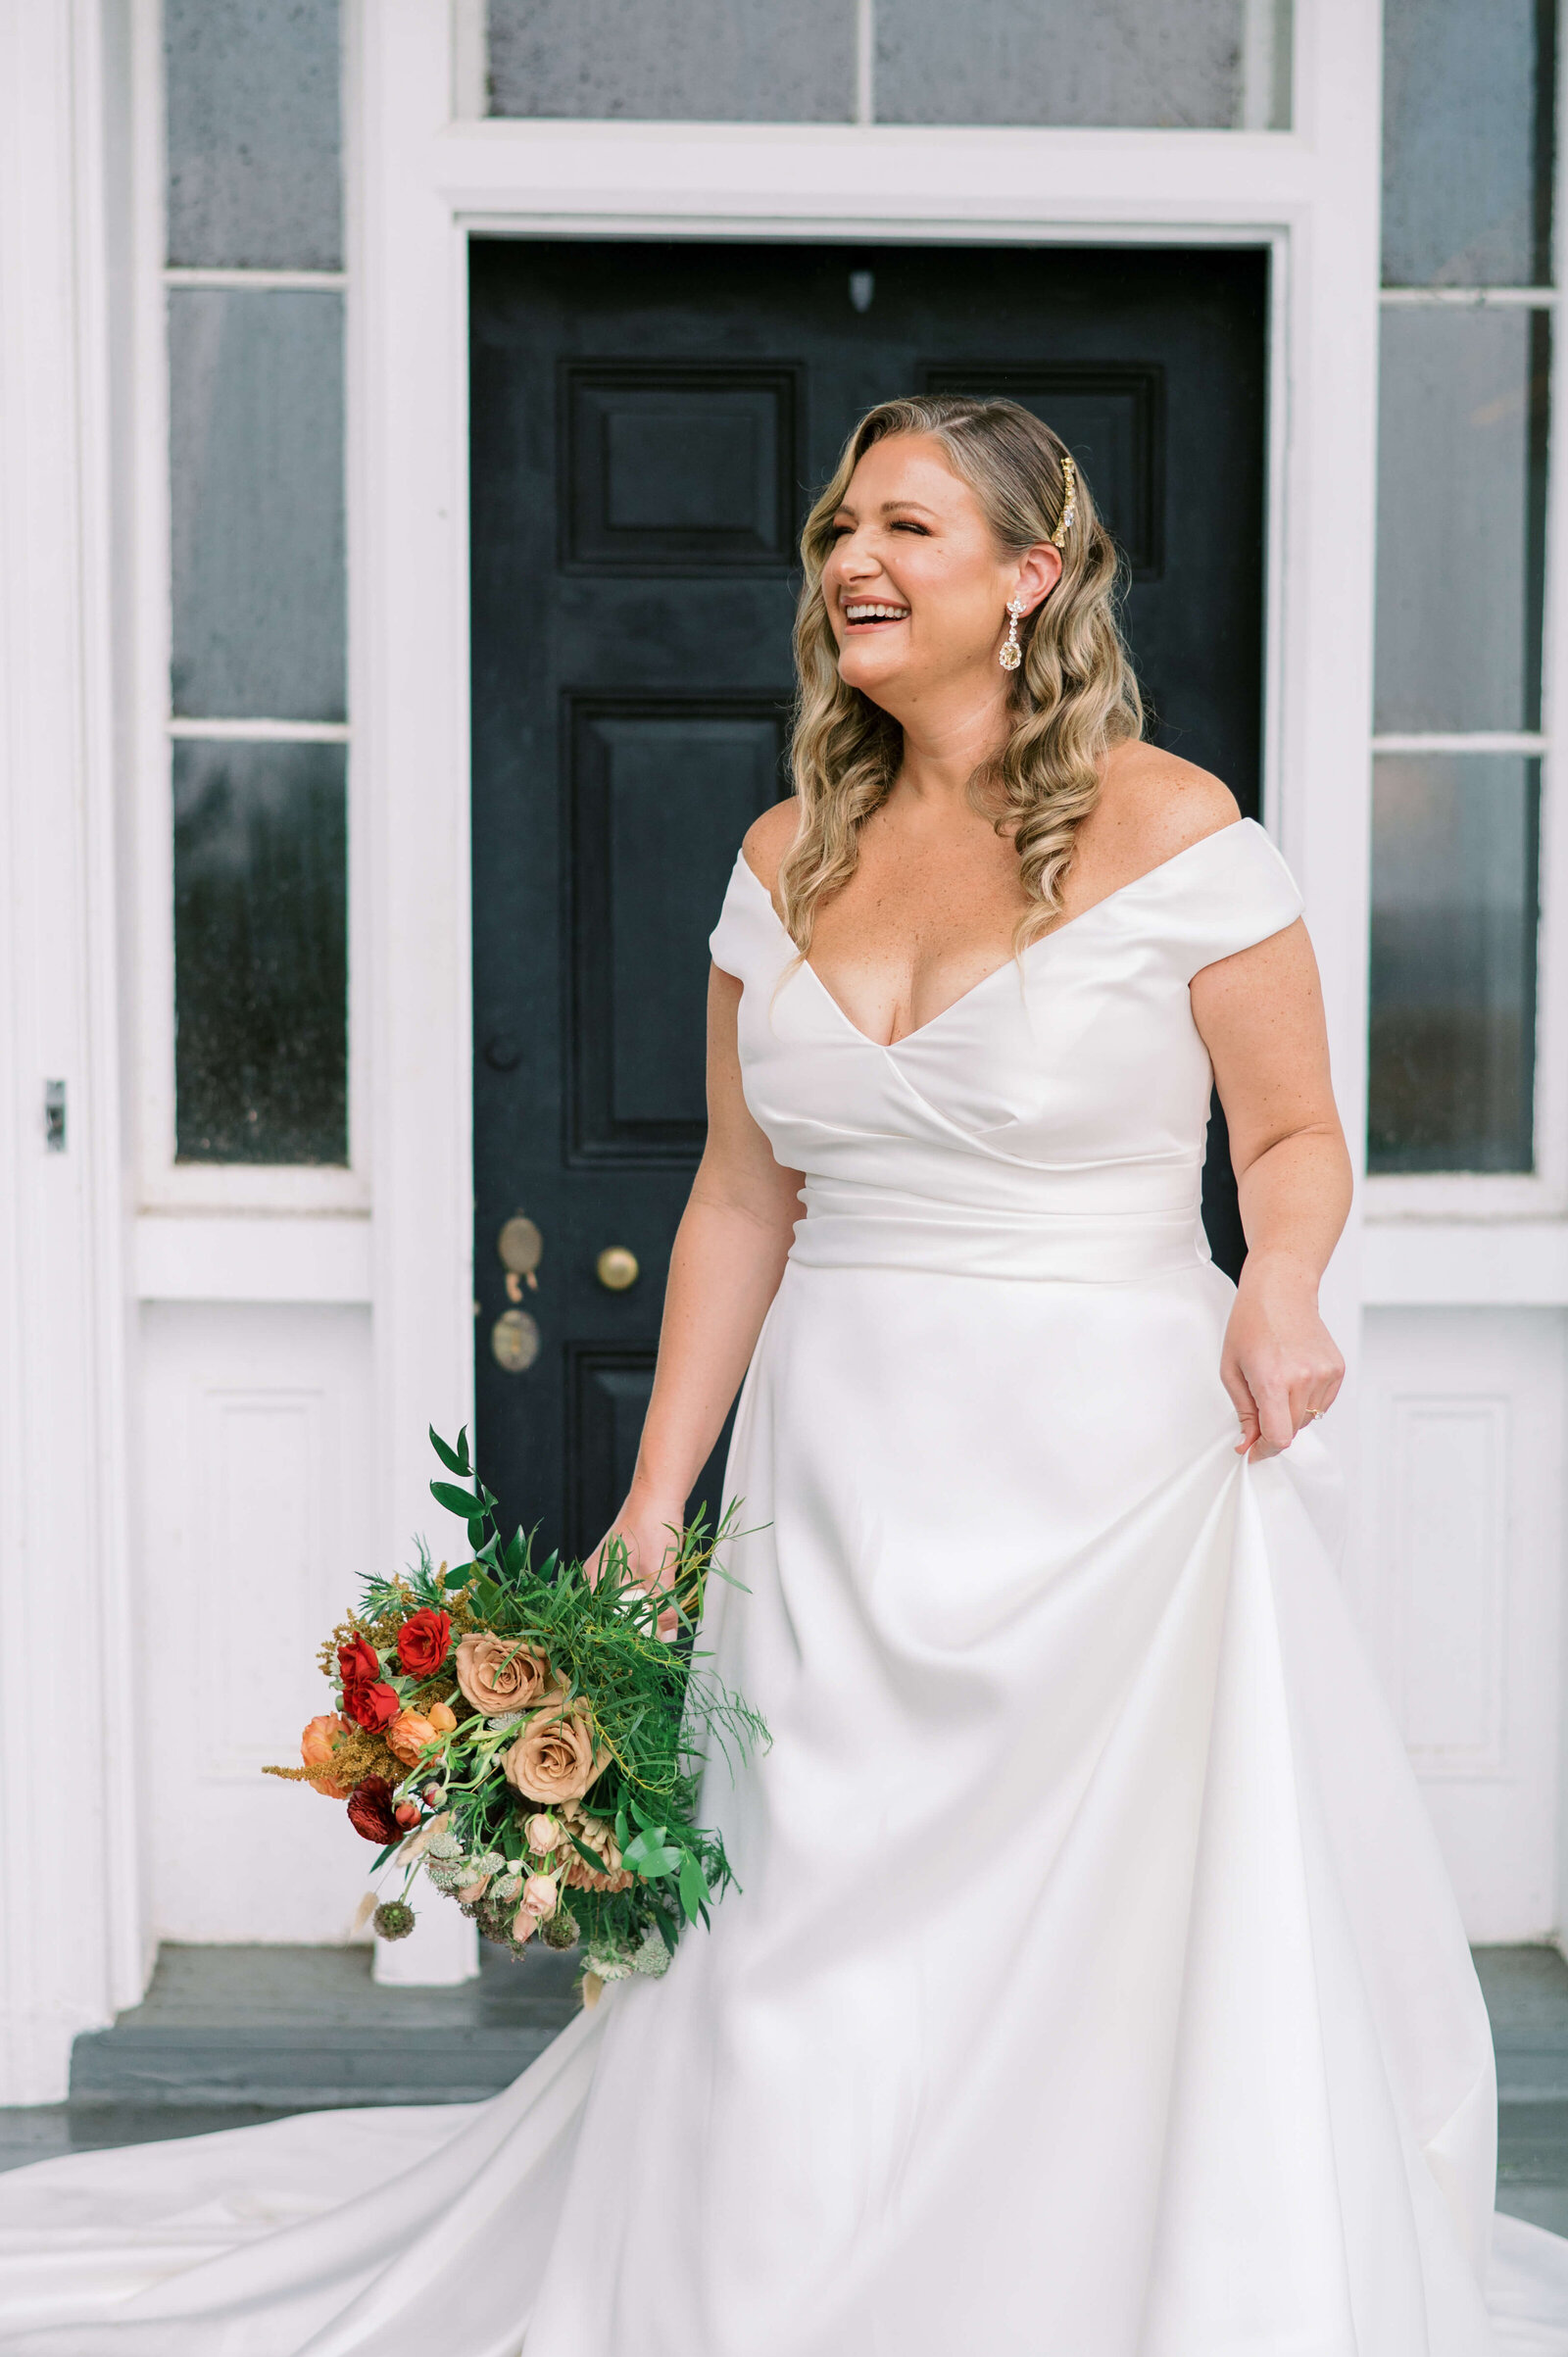 Bride holds bouquet and dress skirt while laughing at the camera